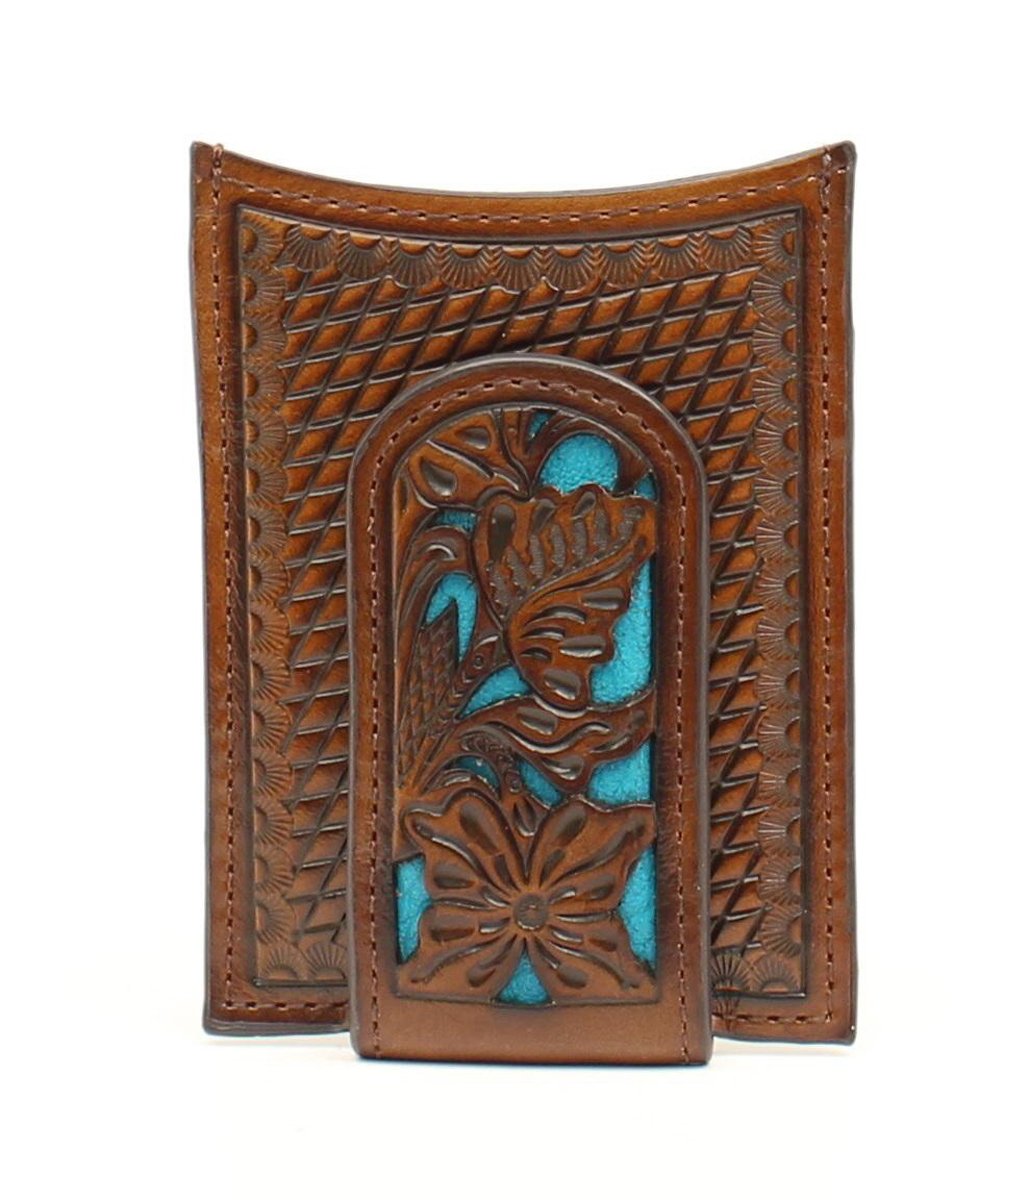 N5426527 Nocona Leather Money Clip Turquoise Inlay